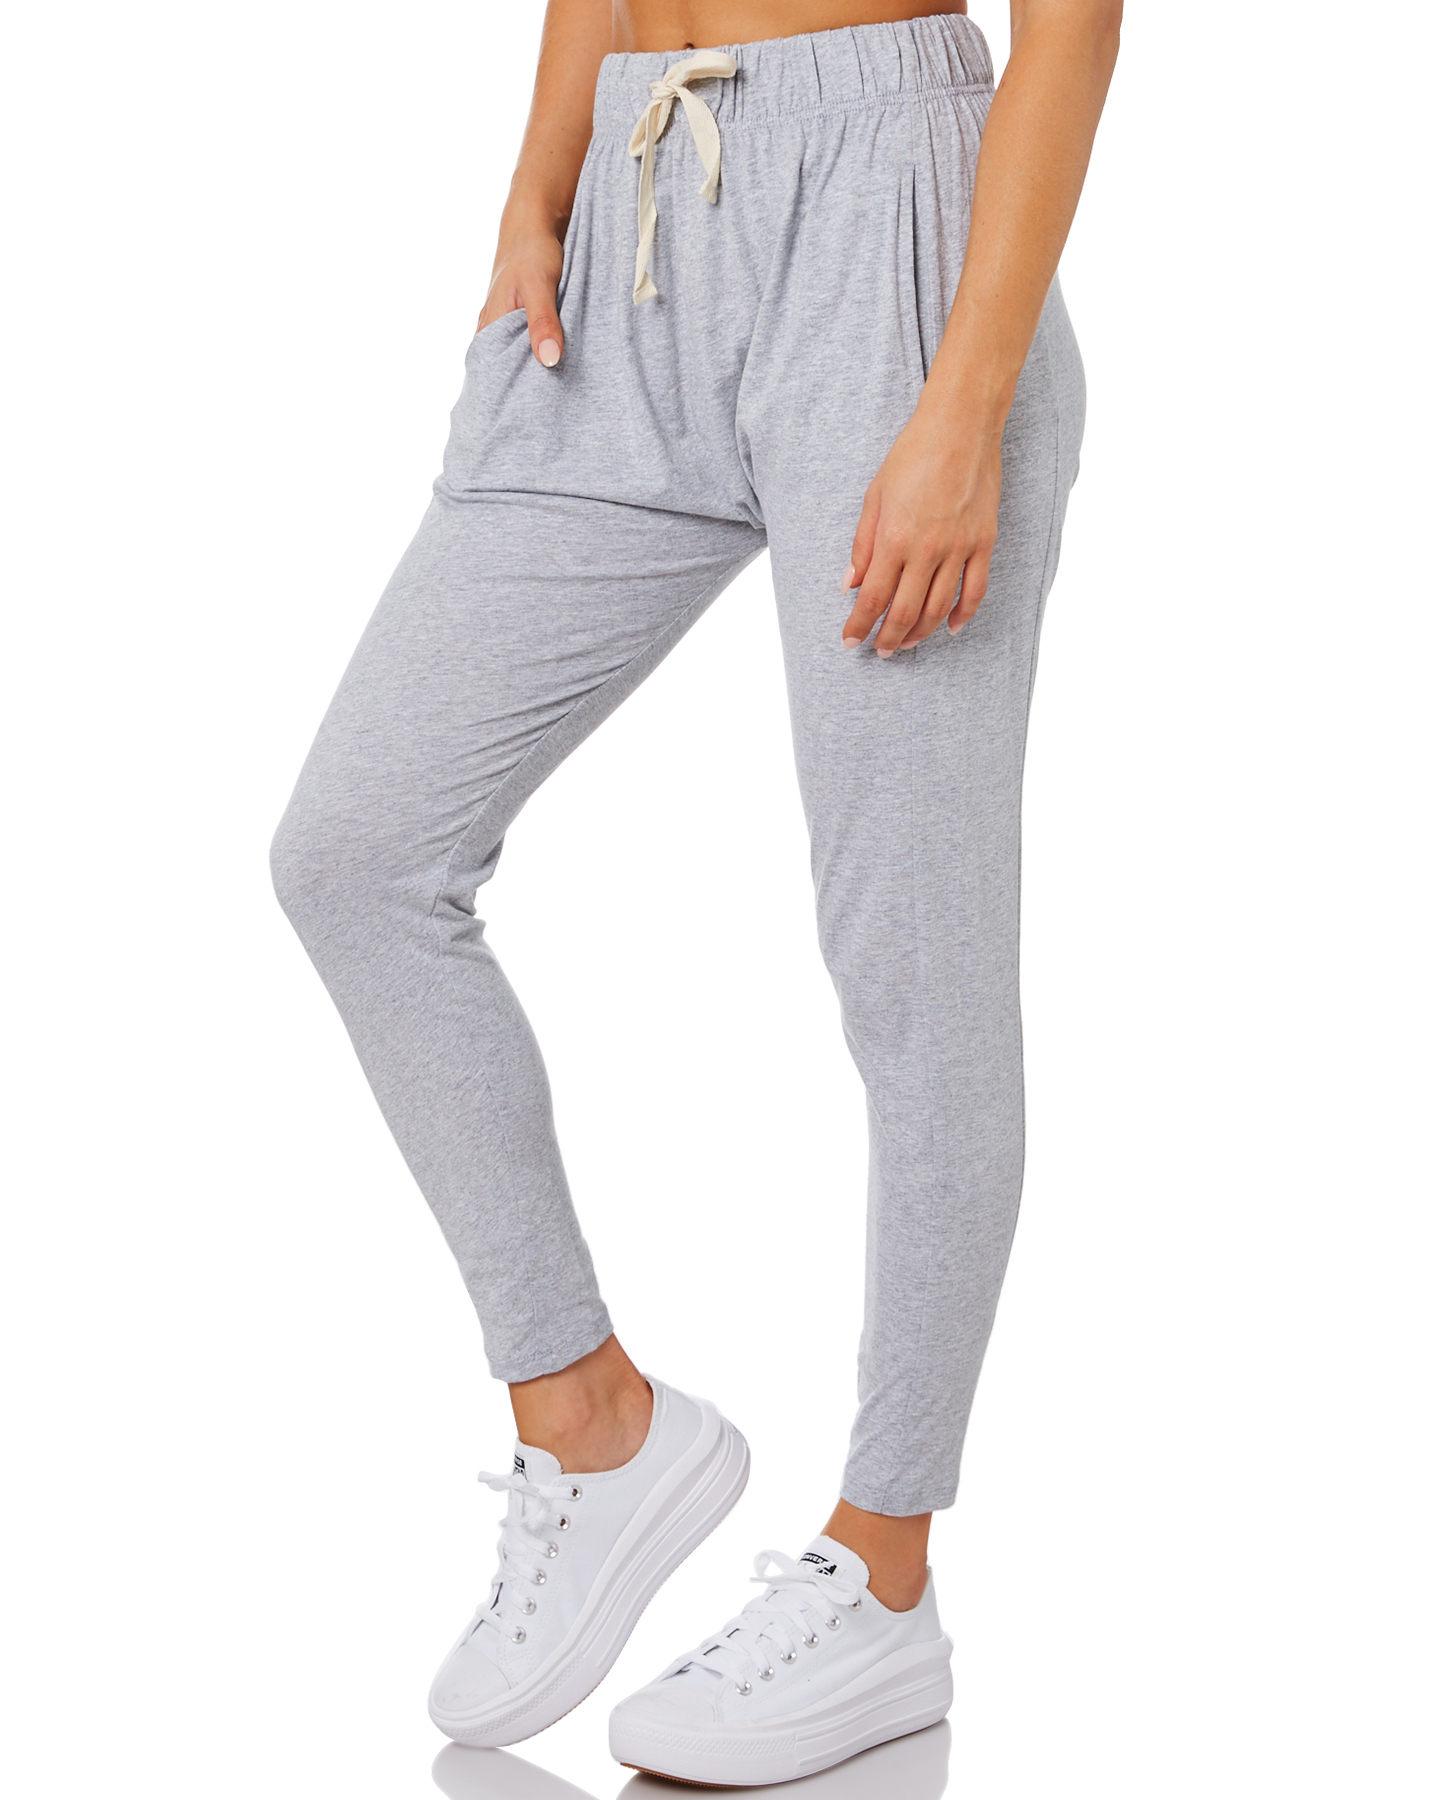 Silent Theory Fluid Womens Pant - Grey Marle | SurfStitch